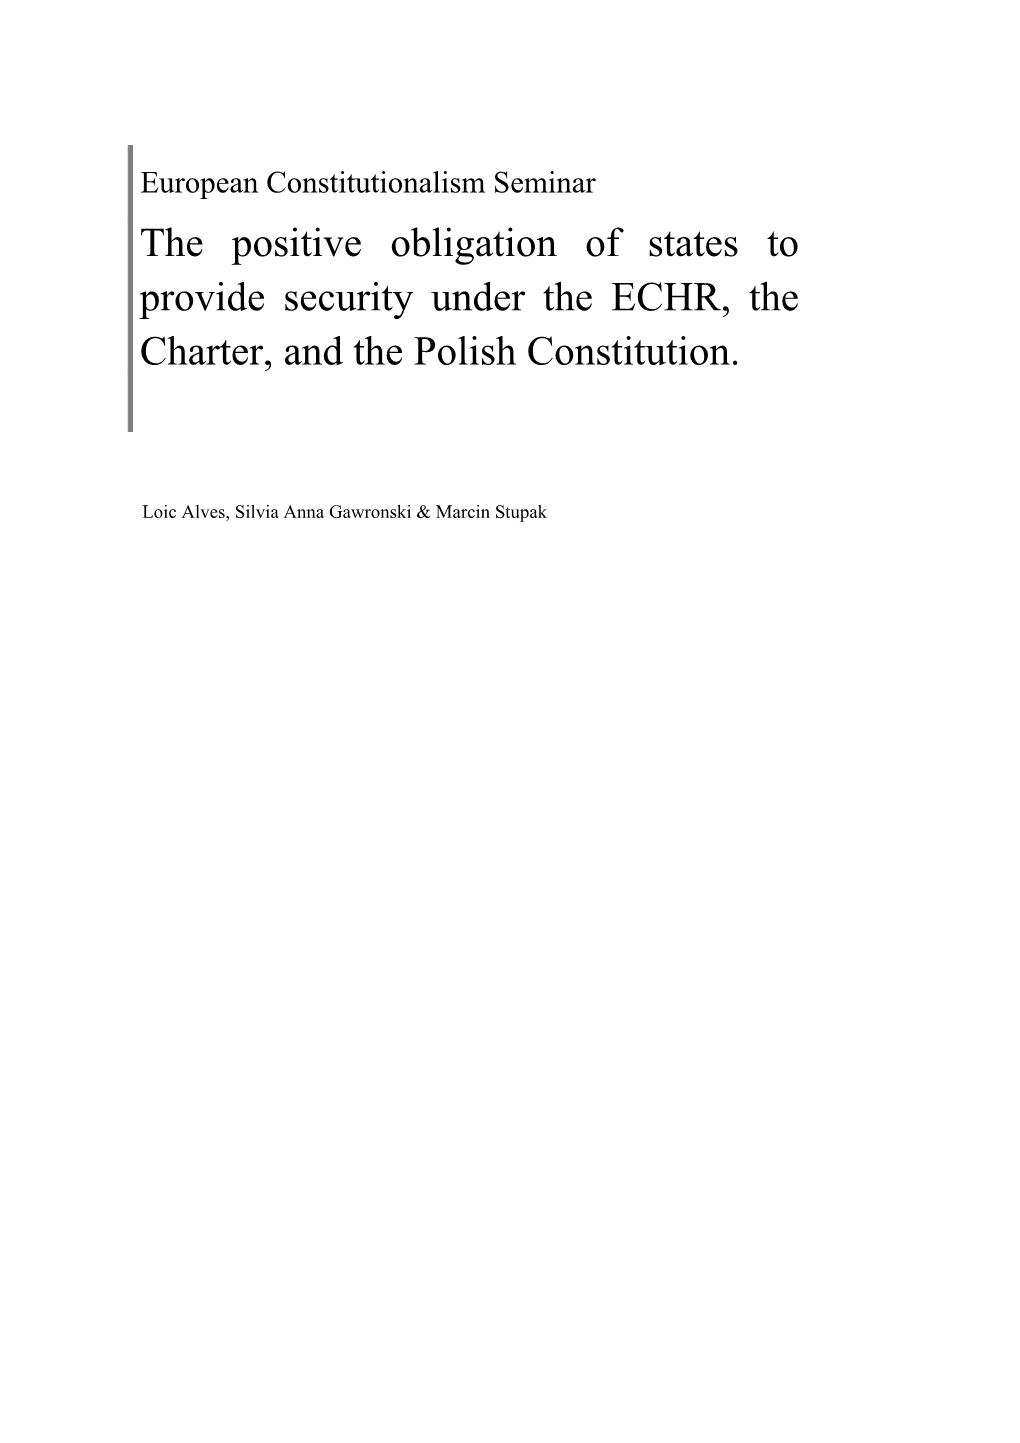 The Positive Obligation of States to Provide Security Under the ECHR, the Charter, And